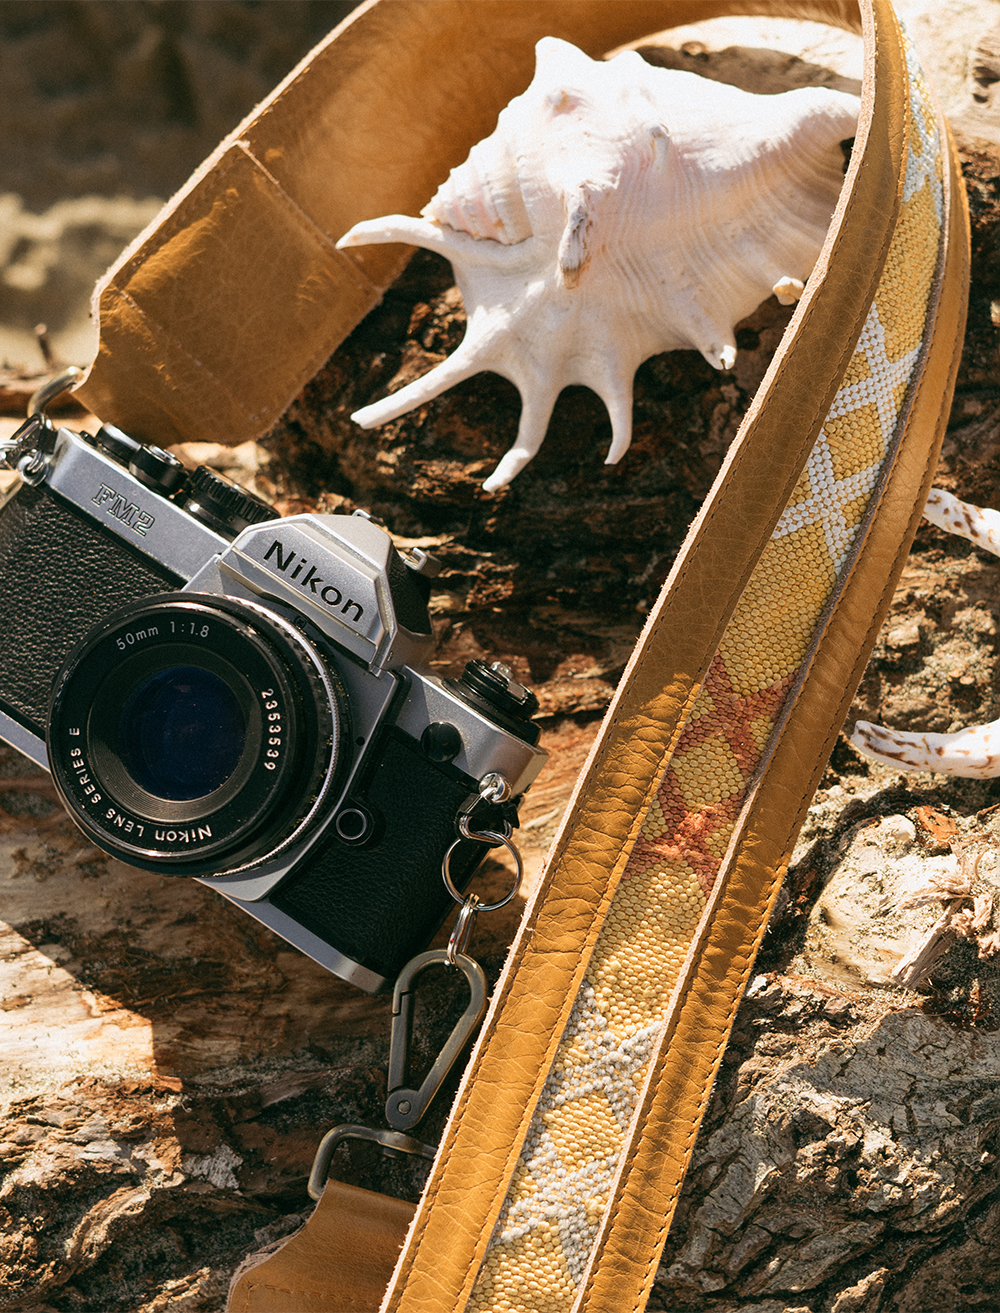 Genuine Leather camera and bags straps - Made in Morocco with cactus silk carpets.